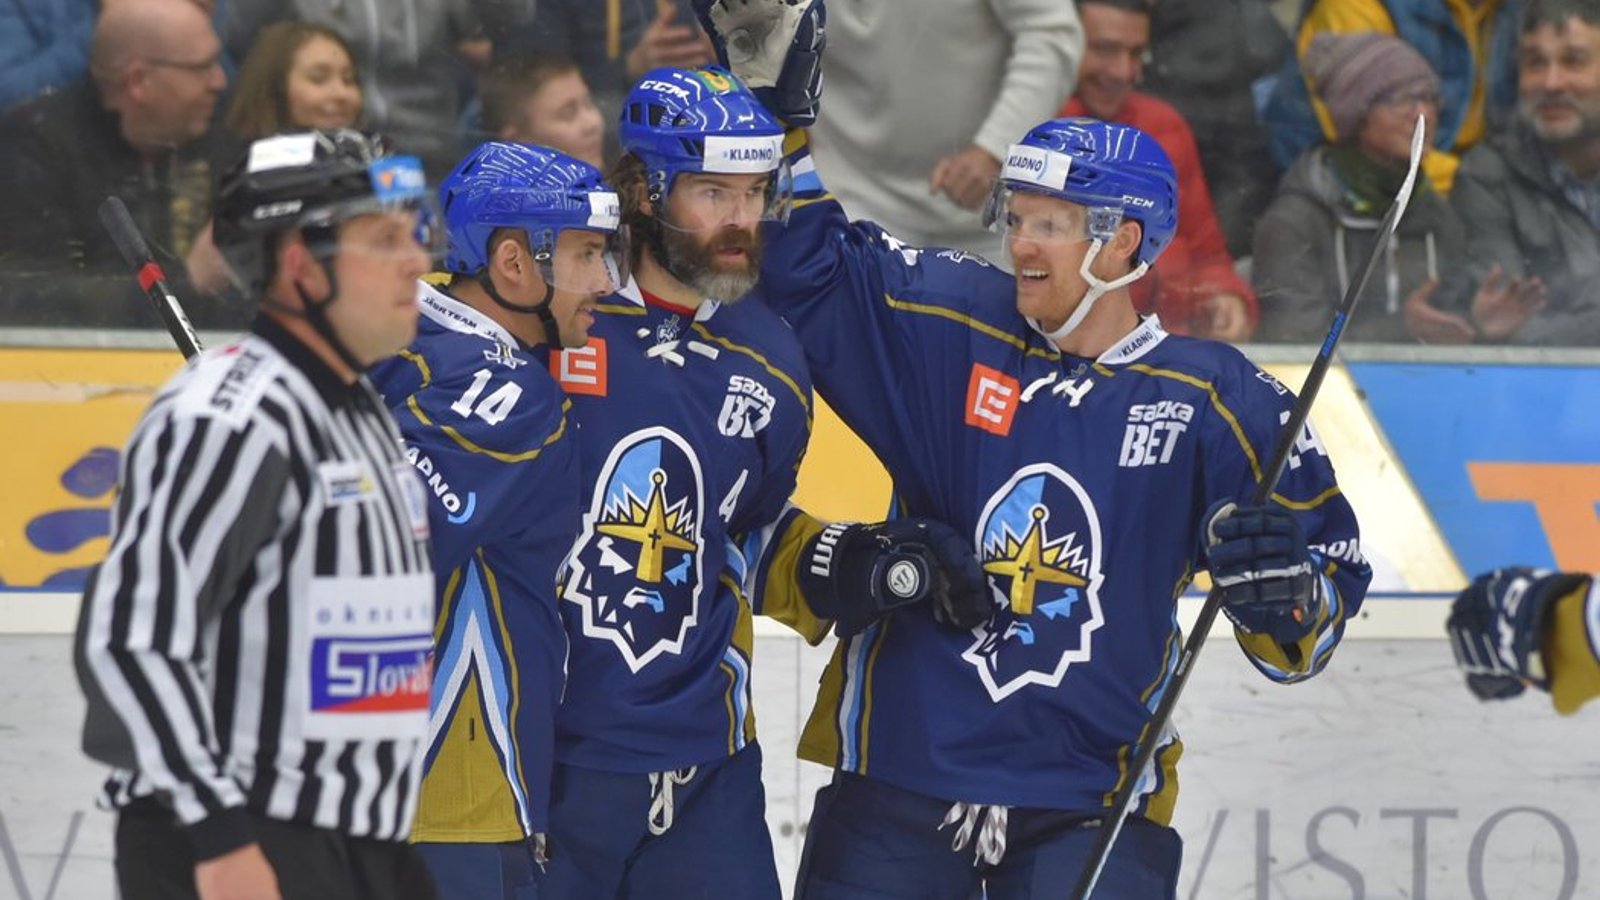 Jaromir Jagr scores incredible goal to get his team back in top league back home! 